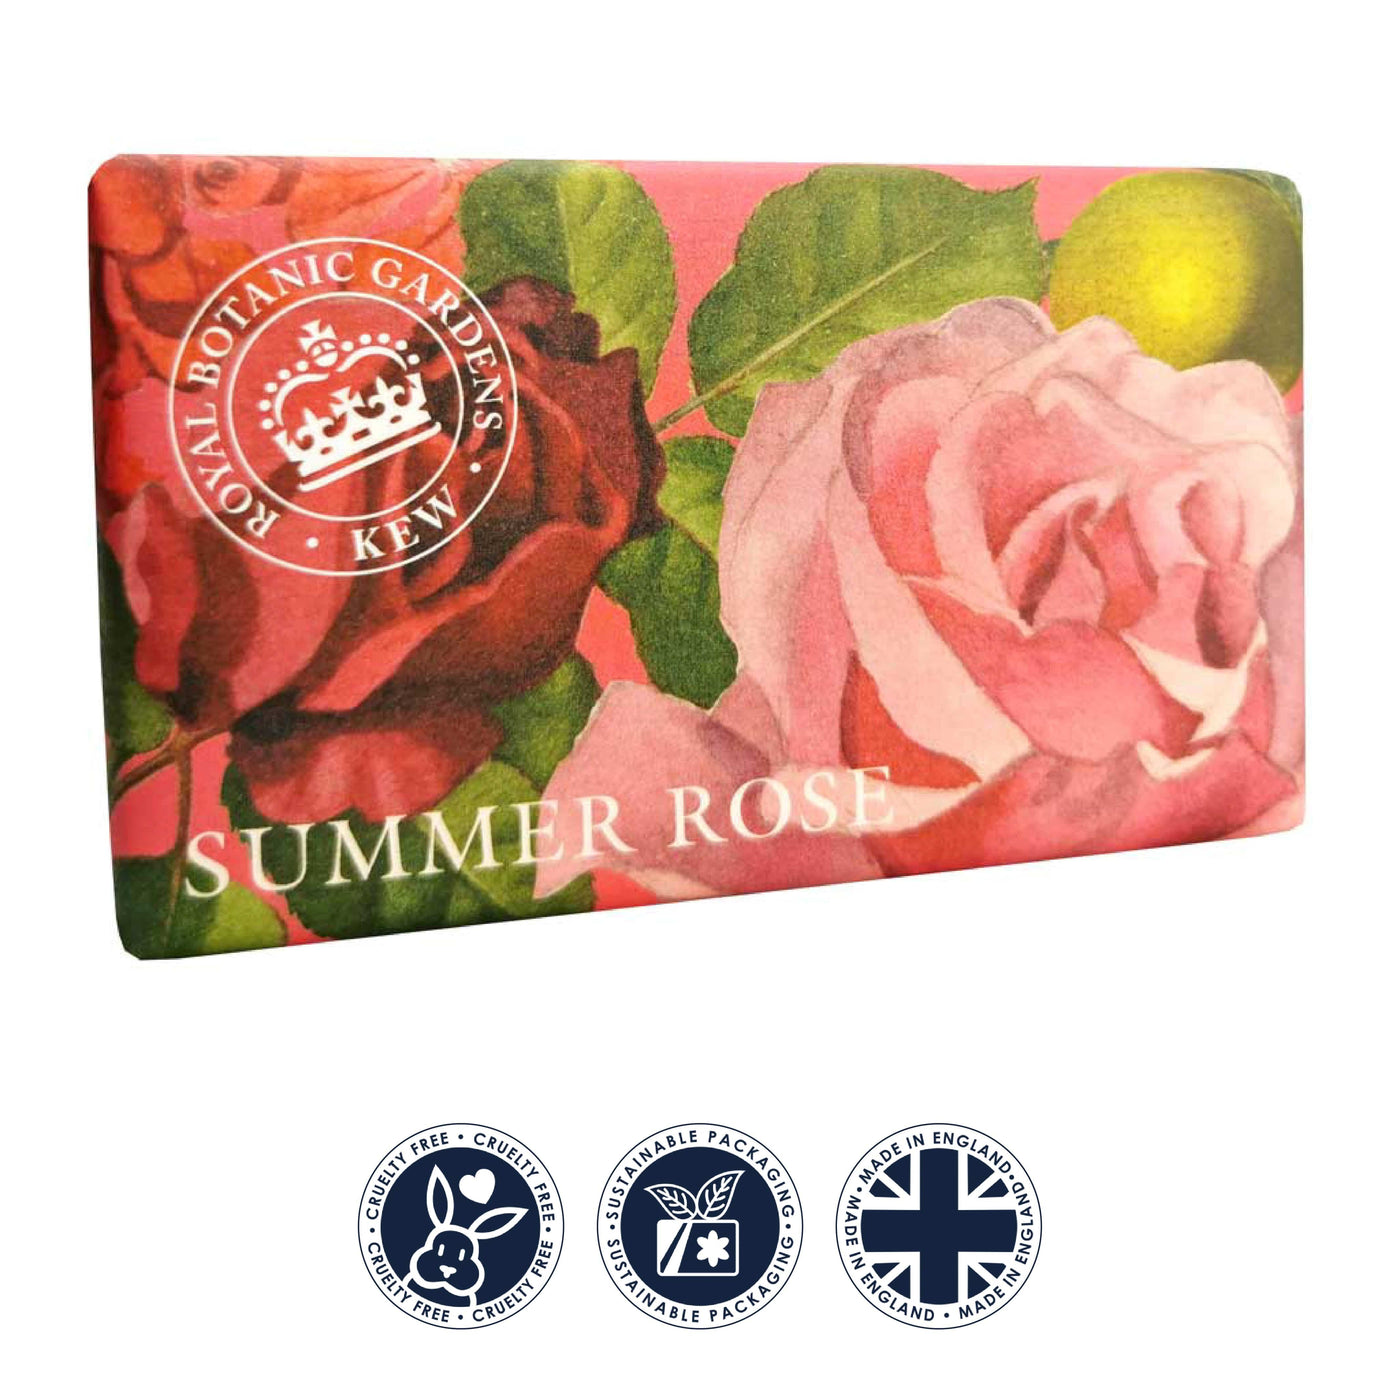 Kew Gardens Summer Rose Soap Bar from our Luxury Bar Soap collection by The English Soap Company